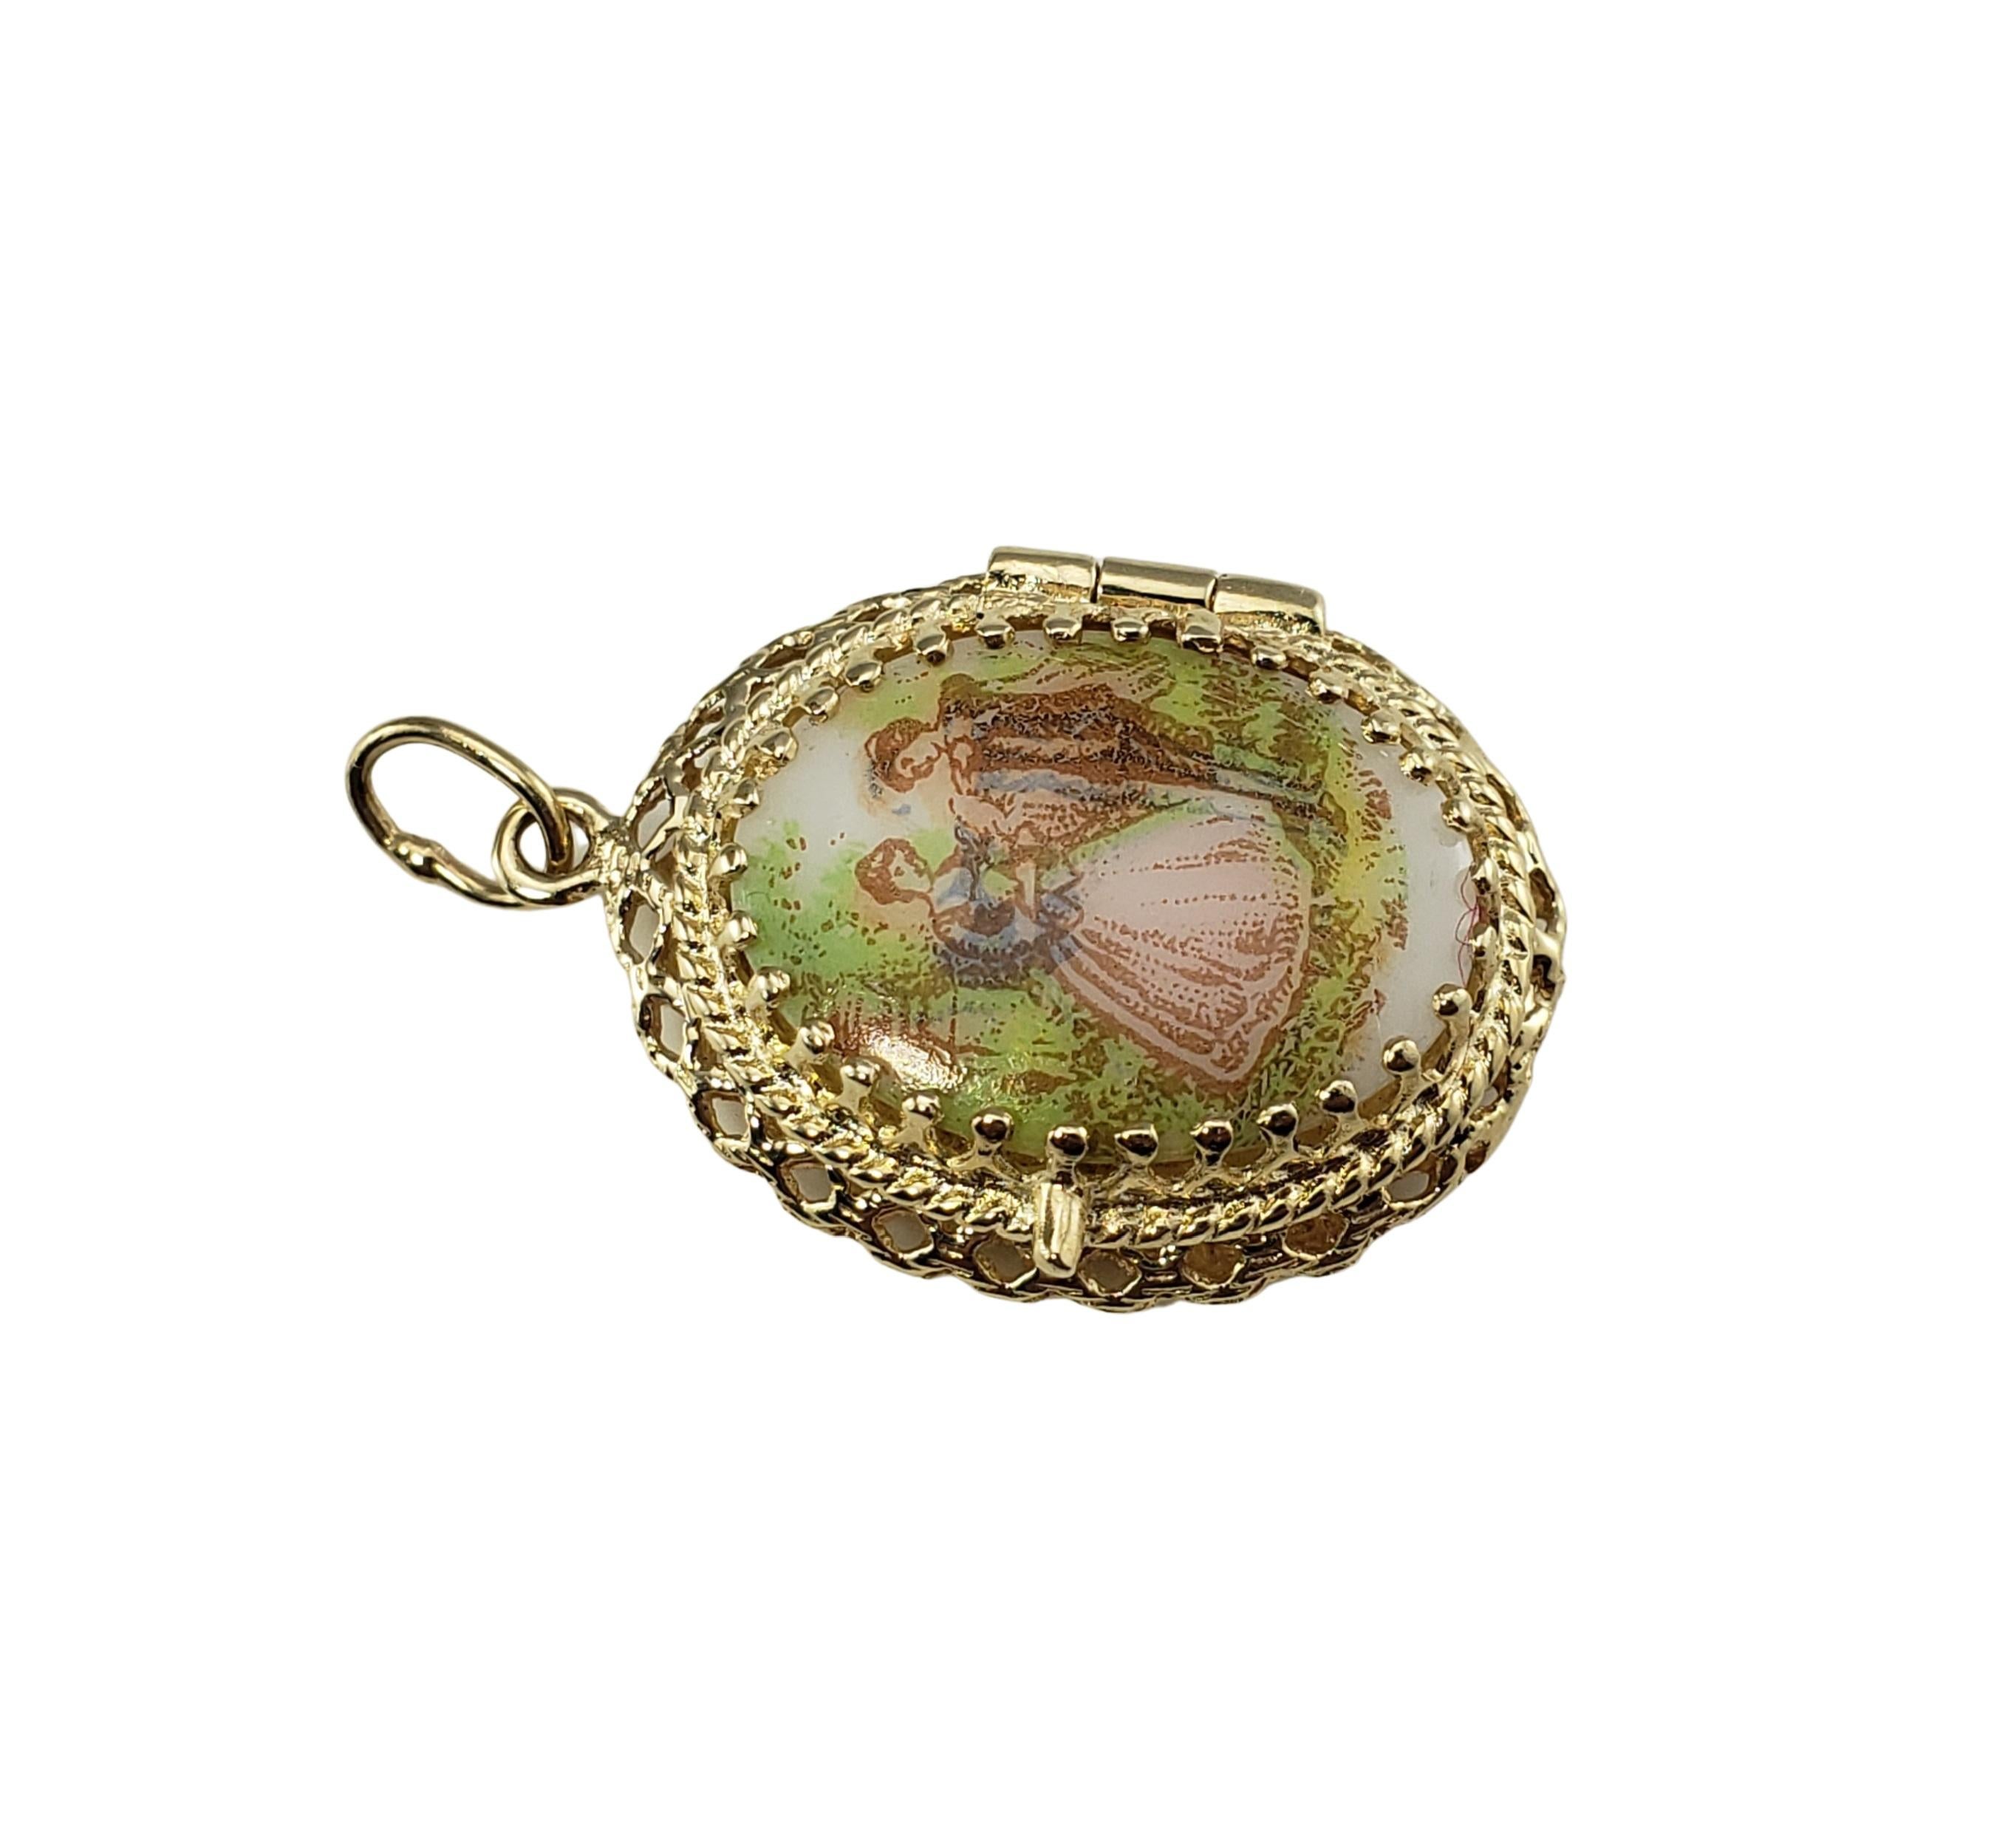 14 Karat Yellow Gold Painted Cameo Locket Pendant-

This lovely painted cameo locket is crafted in beautifully detailed 14K yellow gold.  

Size:  26 mm x 19 mm 

Weight:  2.9 dwt. /  4.6 gr.

Stamped: 14K

Very good condition, professionally